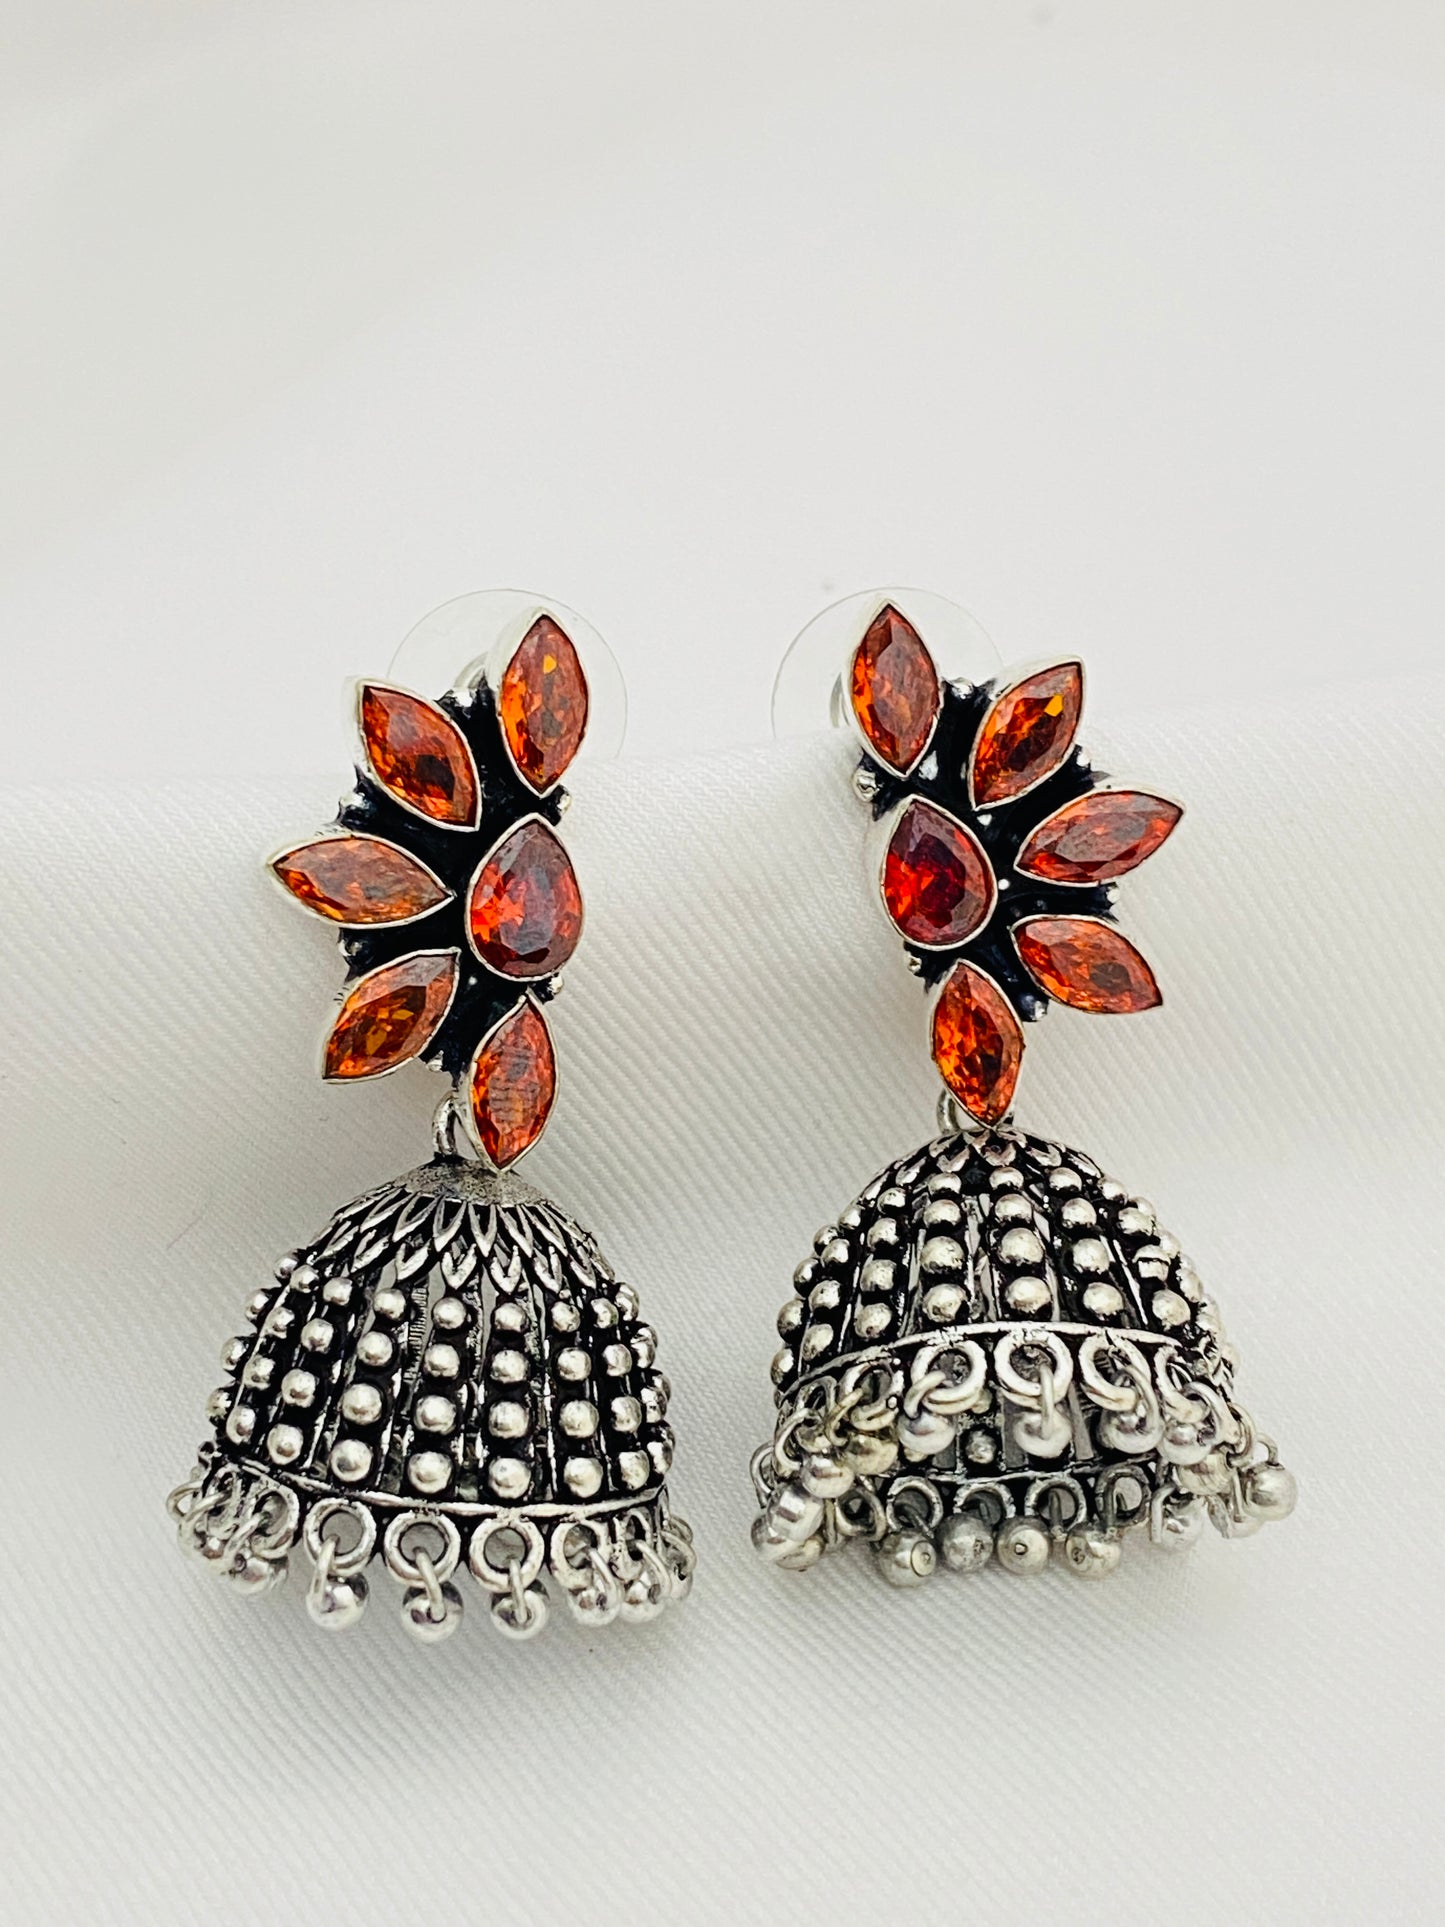 Classic Silver Plated Oxidized Designer Jhumka Earrings With Floral Design And Beads For Women